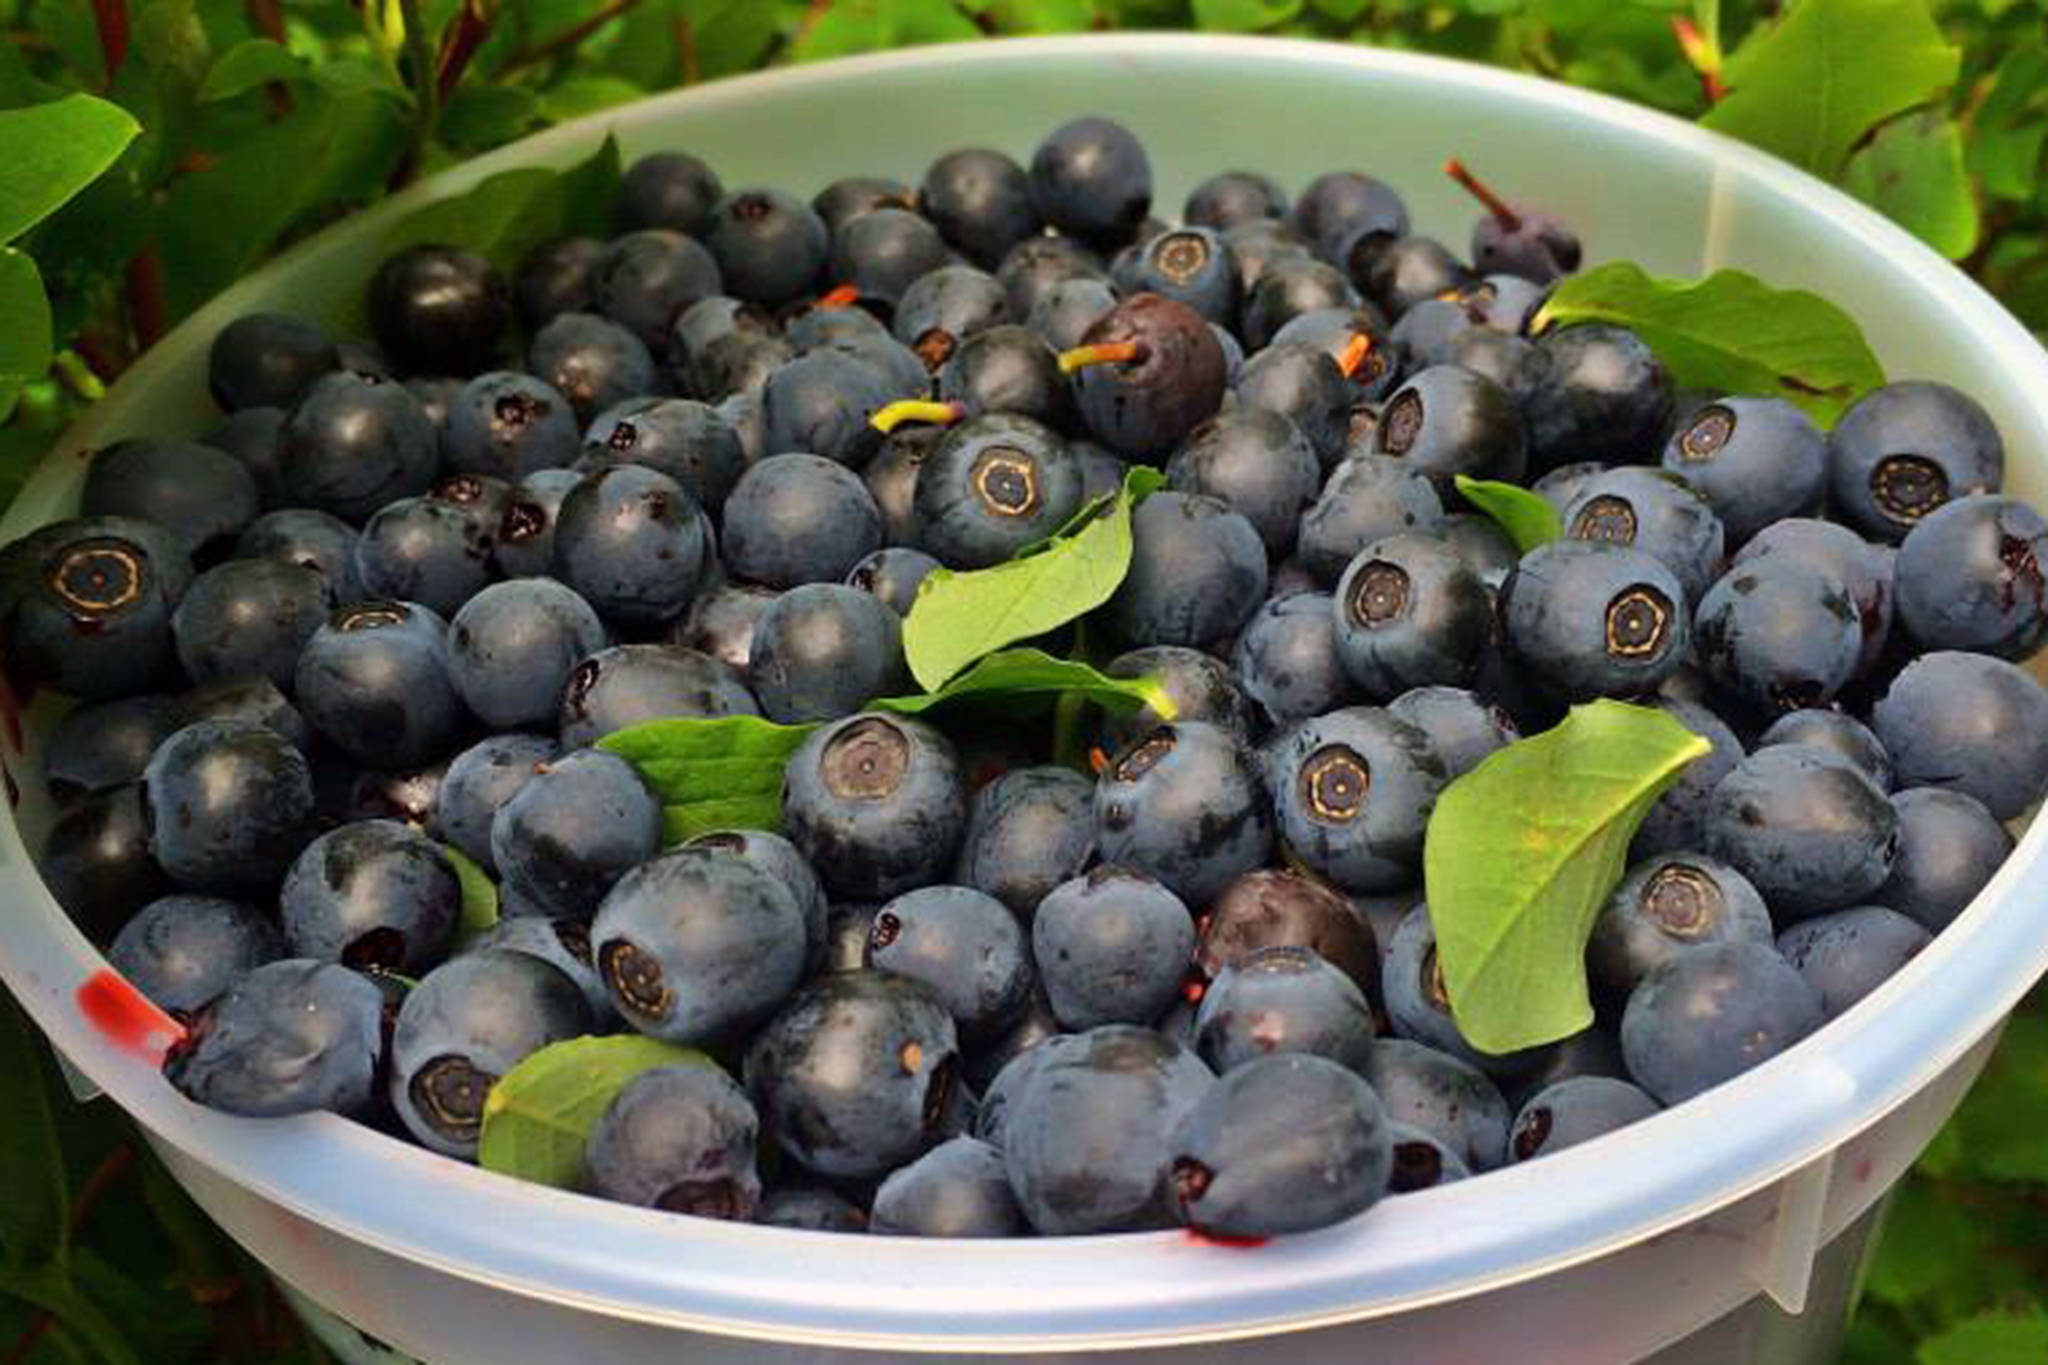 There are many uses for a bucket load of blueberries. (Vivian Faith Prescott | For the Capital City Weekly)